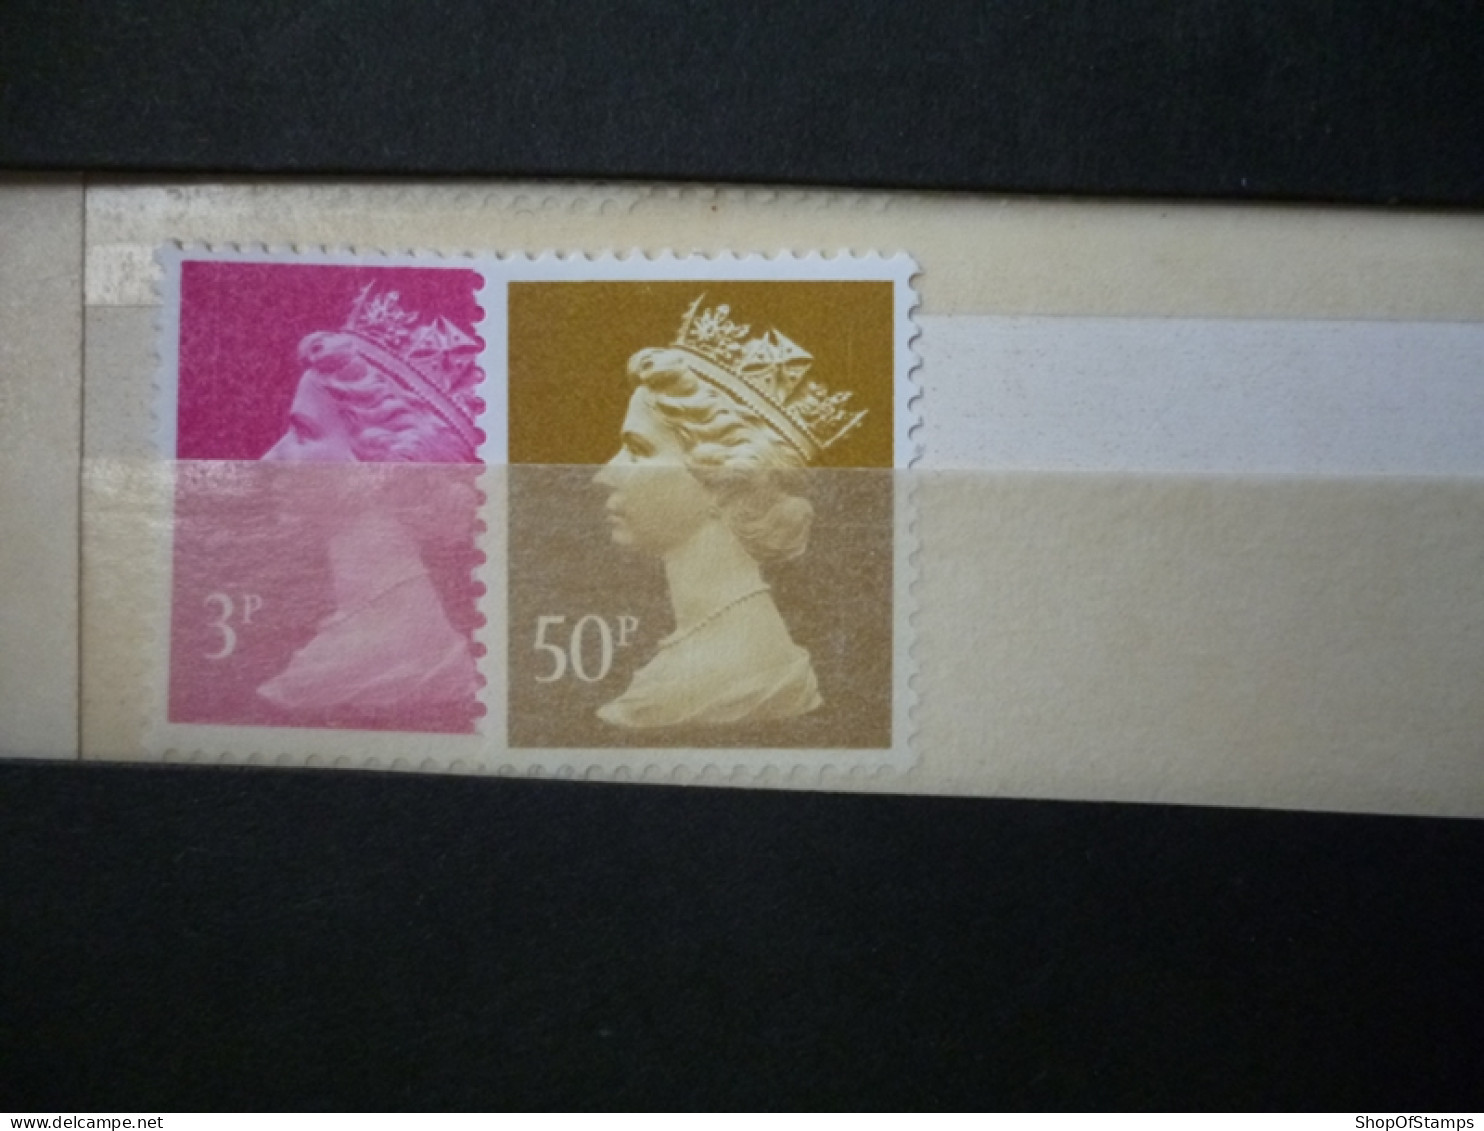 GREAT BRITAIN SG X 19?? 3,50p MINT DEFI ISSUE FROM GPO IN ENVELOPE - Franking Machines (EMA)